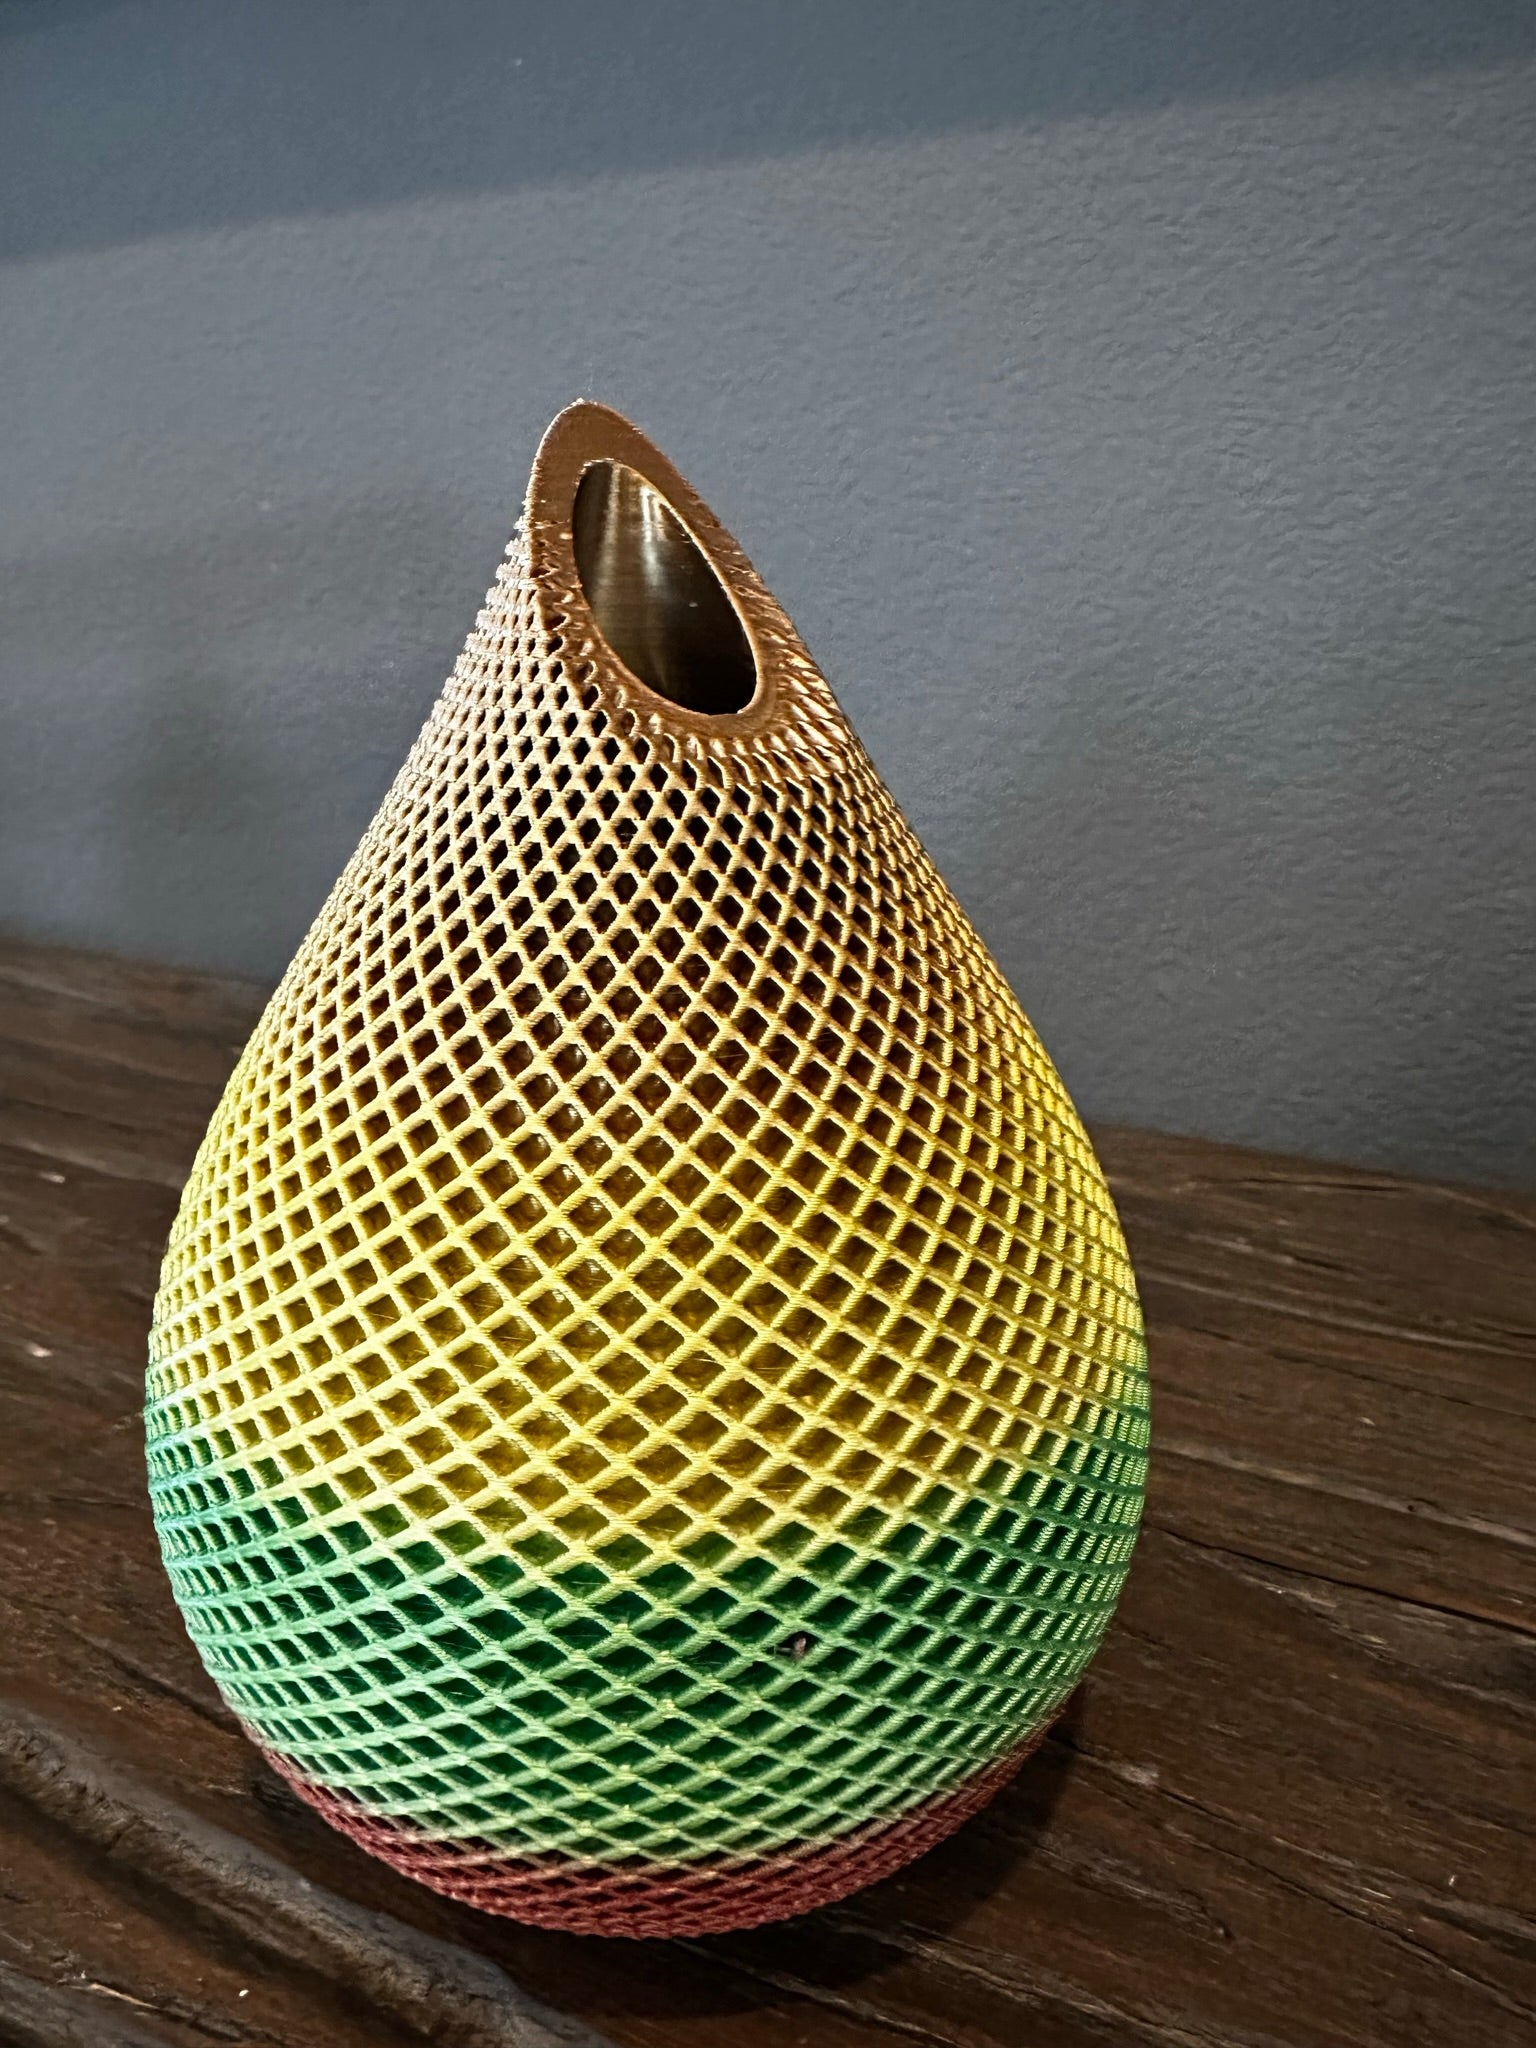 Handmade 3D Printed Vase in Rainbow color with Mesh Pattern